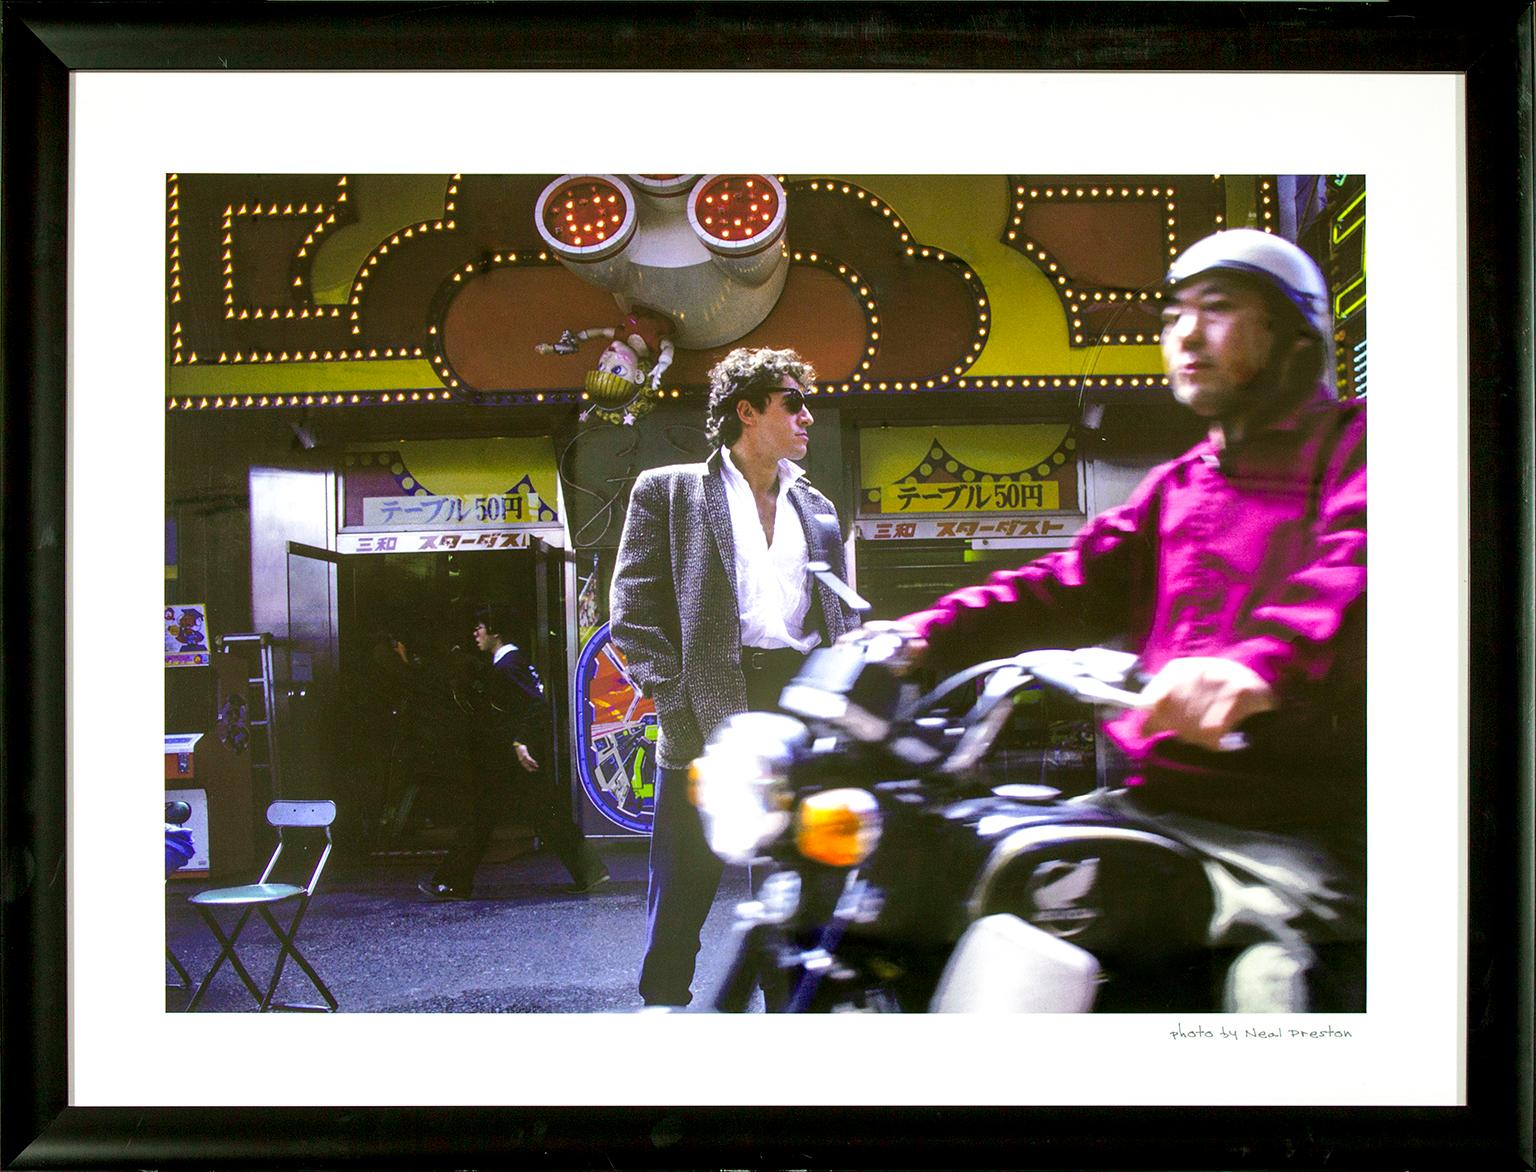 "Bruce Springsteen" framed color photograph by Neal Preston. Image size: 24 x 34 inches. Photo by Neal Preston hand written on front lower right. This photograph was previously displayed in a guest room of the original Hard Rock Hotel and Casino in